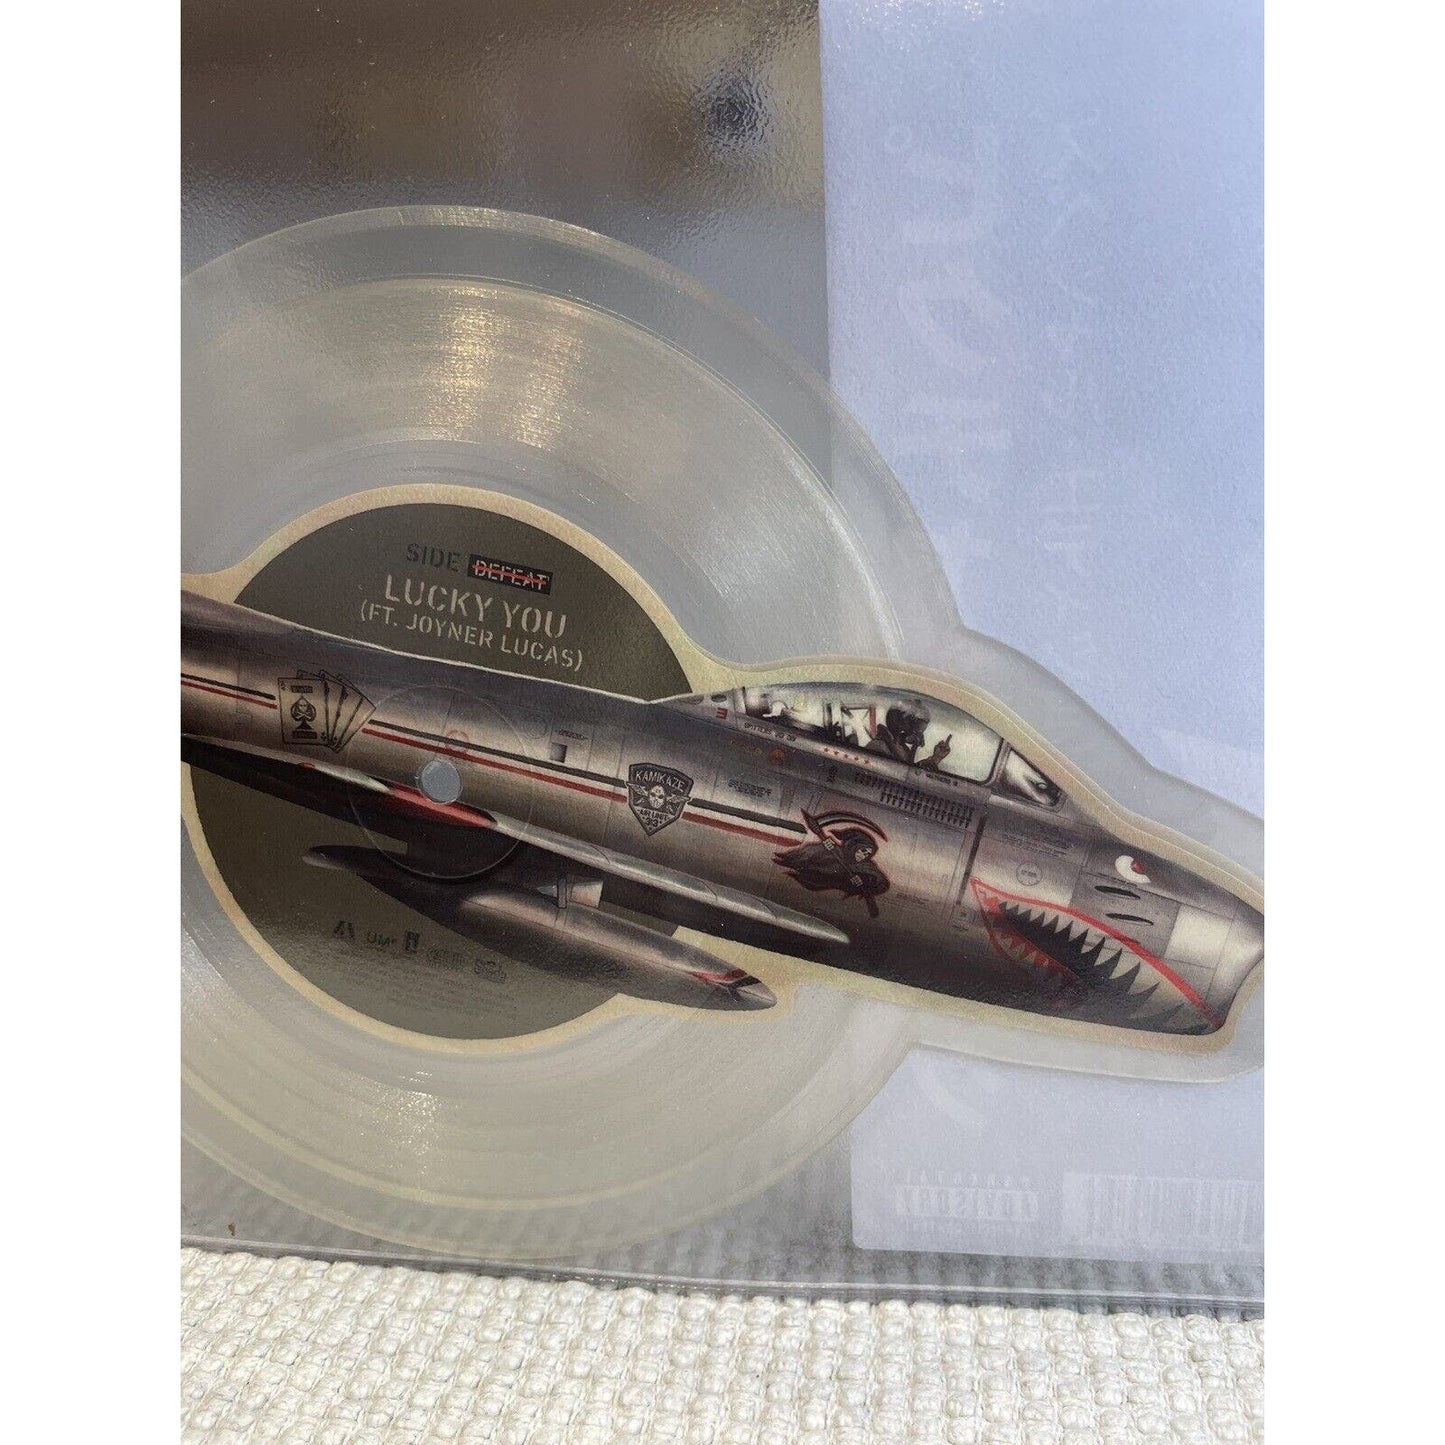 Limited Edition Eminem Kamikaze 5th Anniversary 7" Picture Disc SOLD OUT Mint